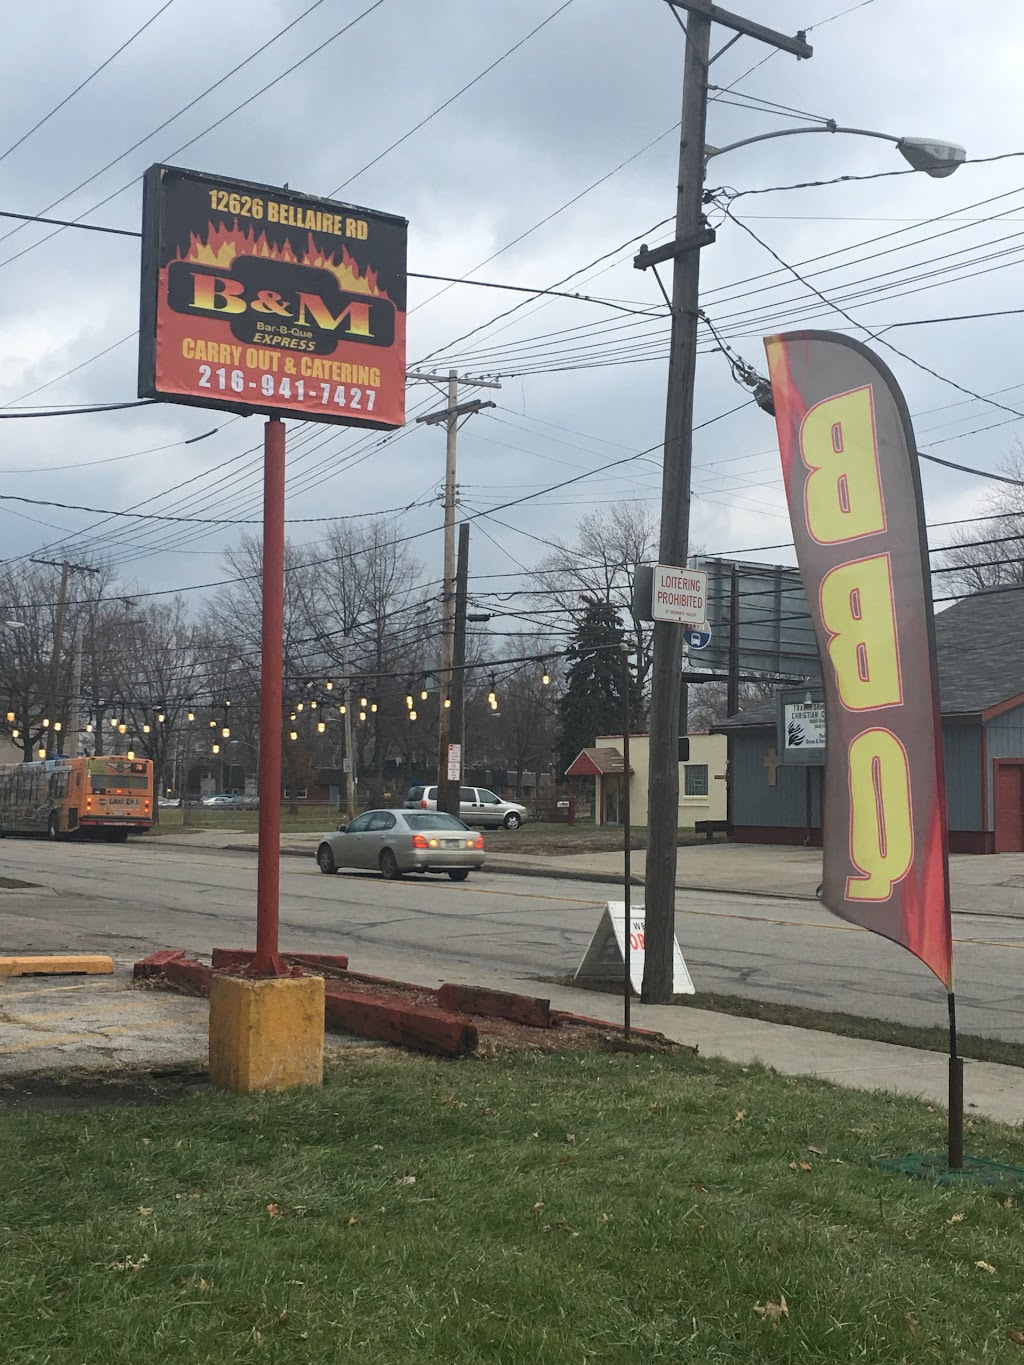 B & M Barbeque | 12626 Bellaire Rd, Cleveland, OH 44135, USA | Phone: (216) 941-7427